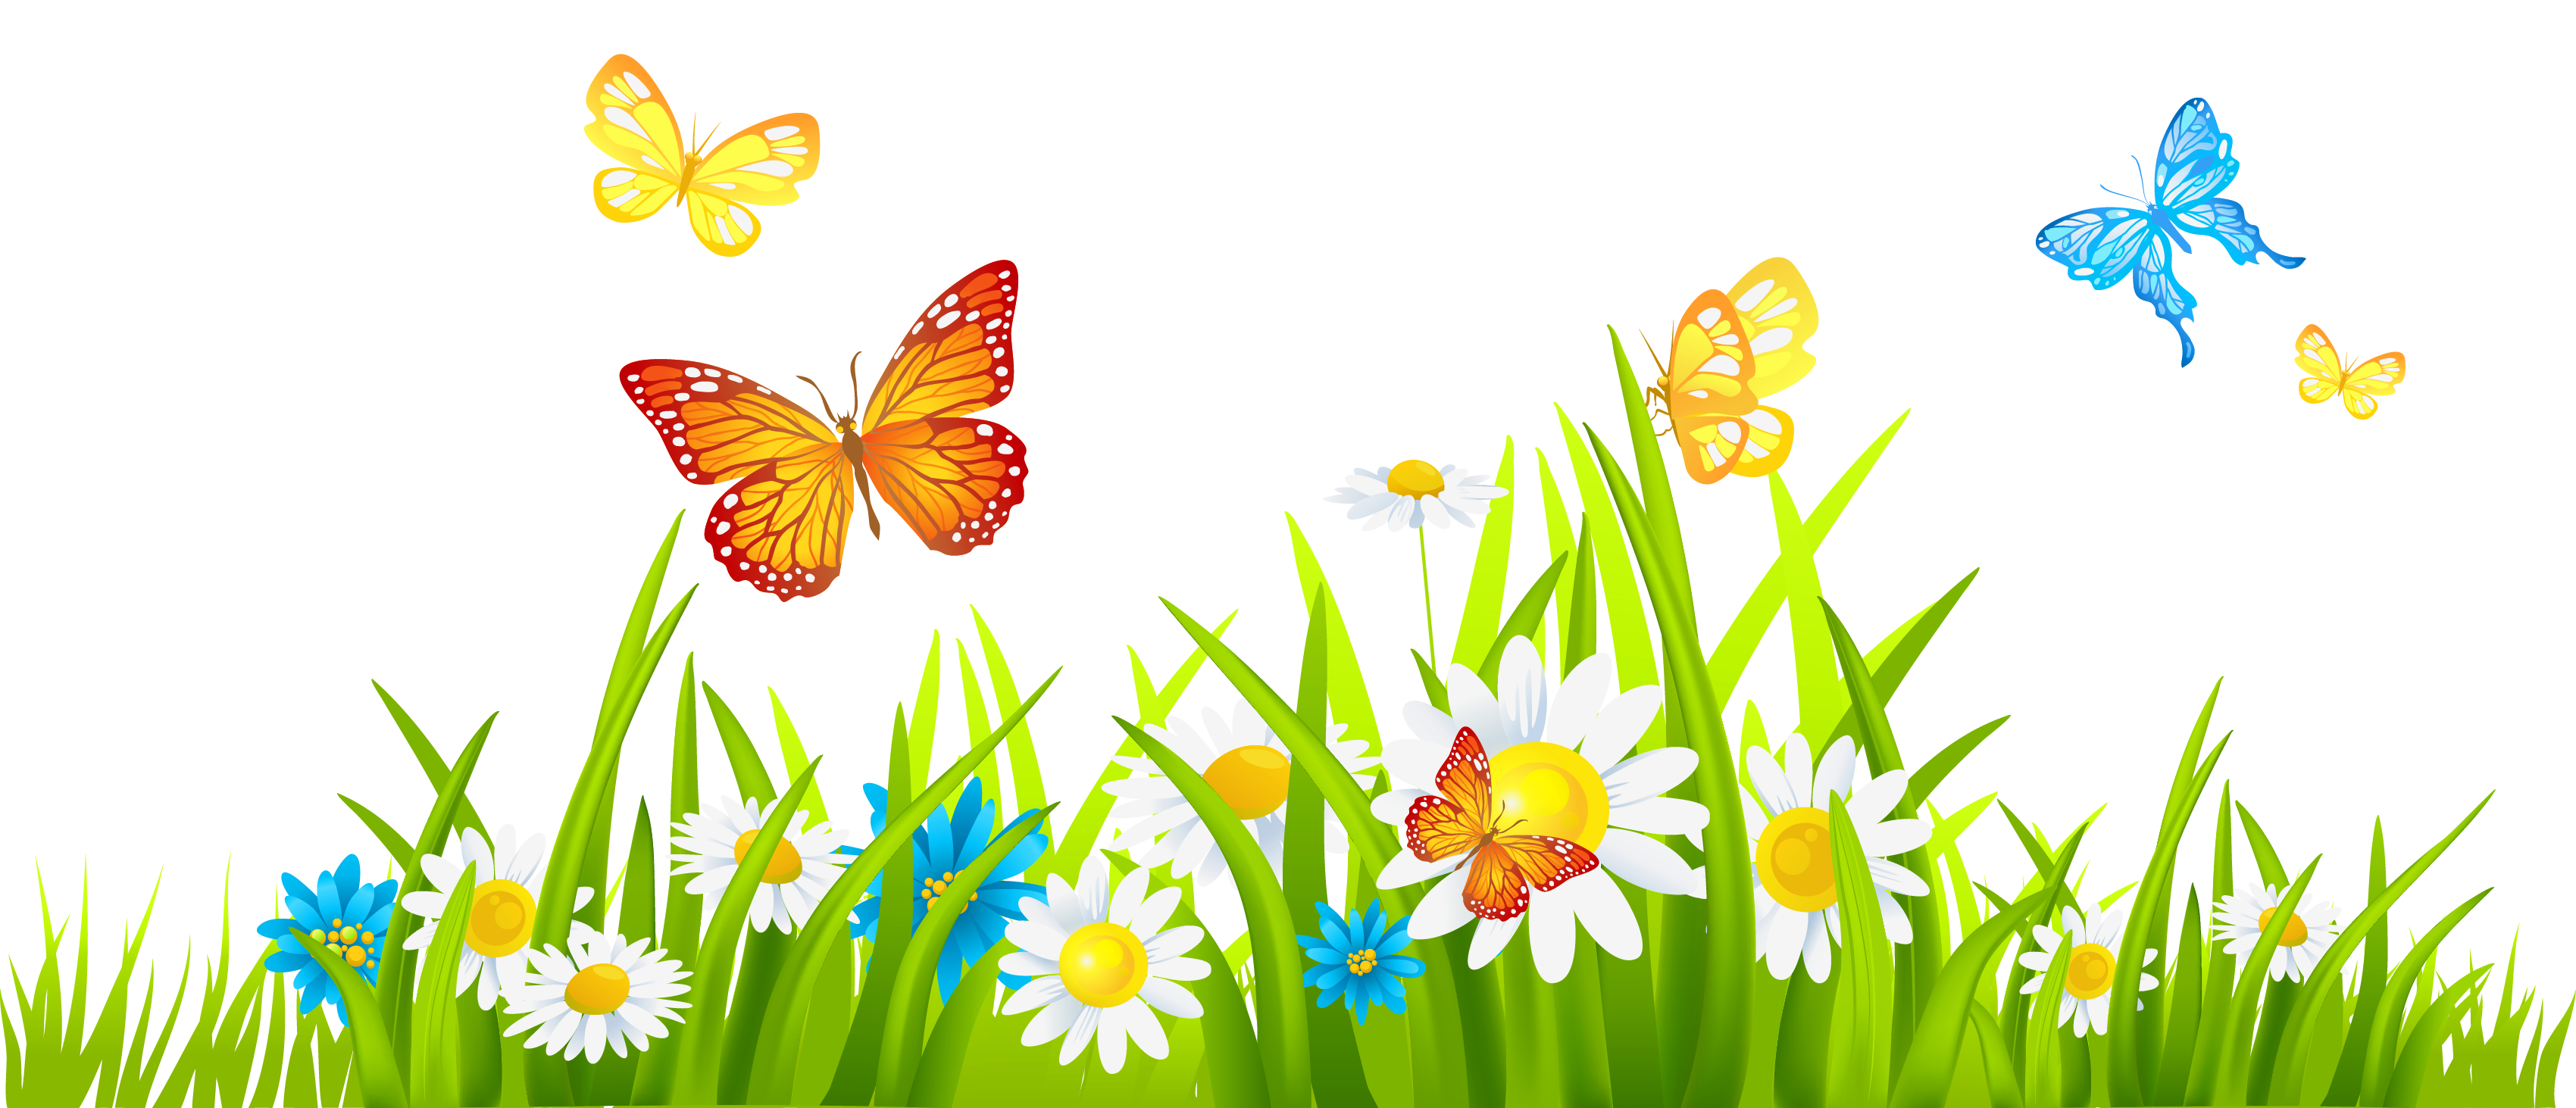 flower clipart download free - photo #32